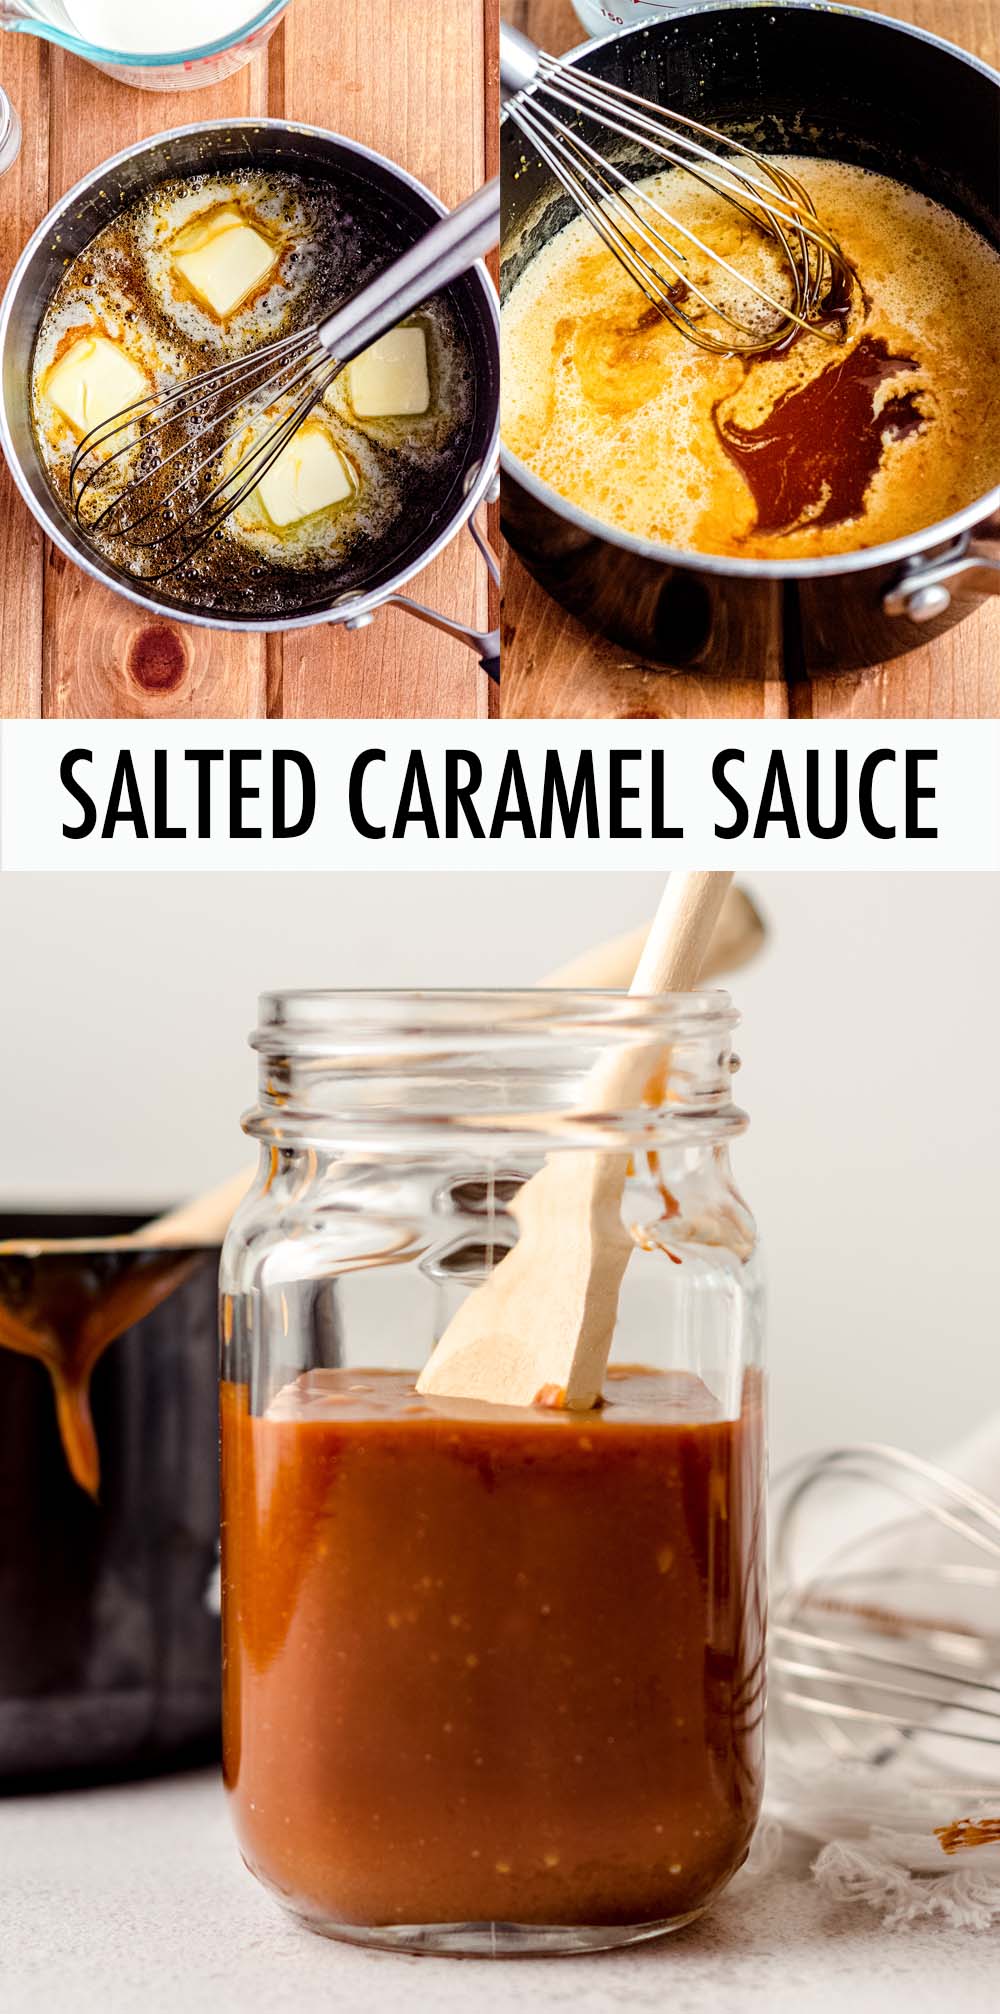 You only need four simple ingredients to make your own homemade salted caramel sauce. In this recipe, I use the "wet" caramel method which is my tried and true method. via @frshaprilflours